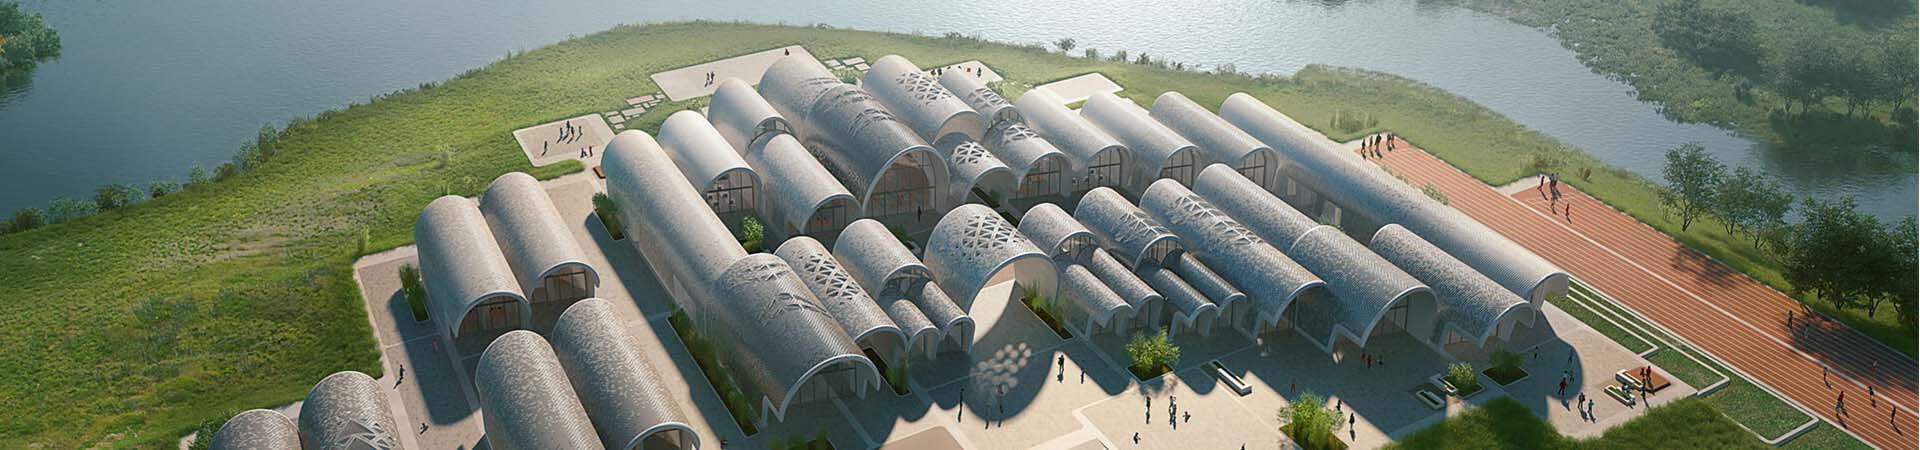 Using Remote Robotic Construction Techniques for Architectural Development of an Extraordinary School in Rural China